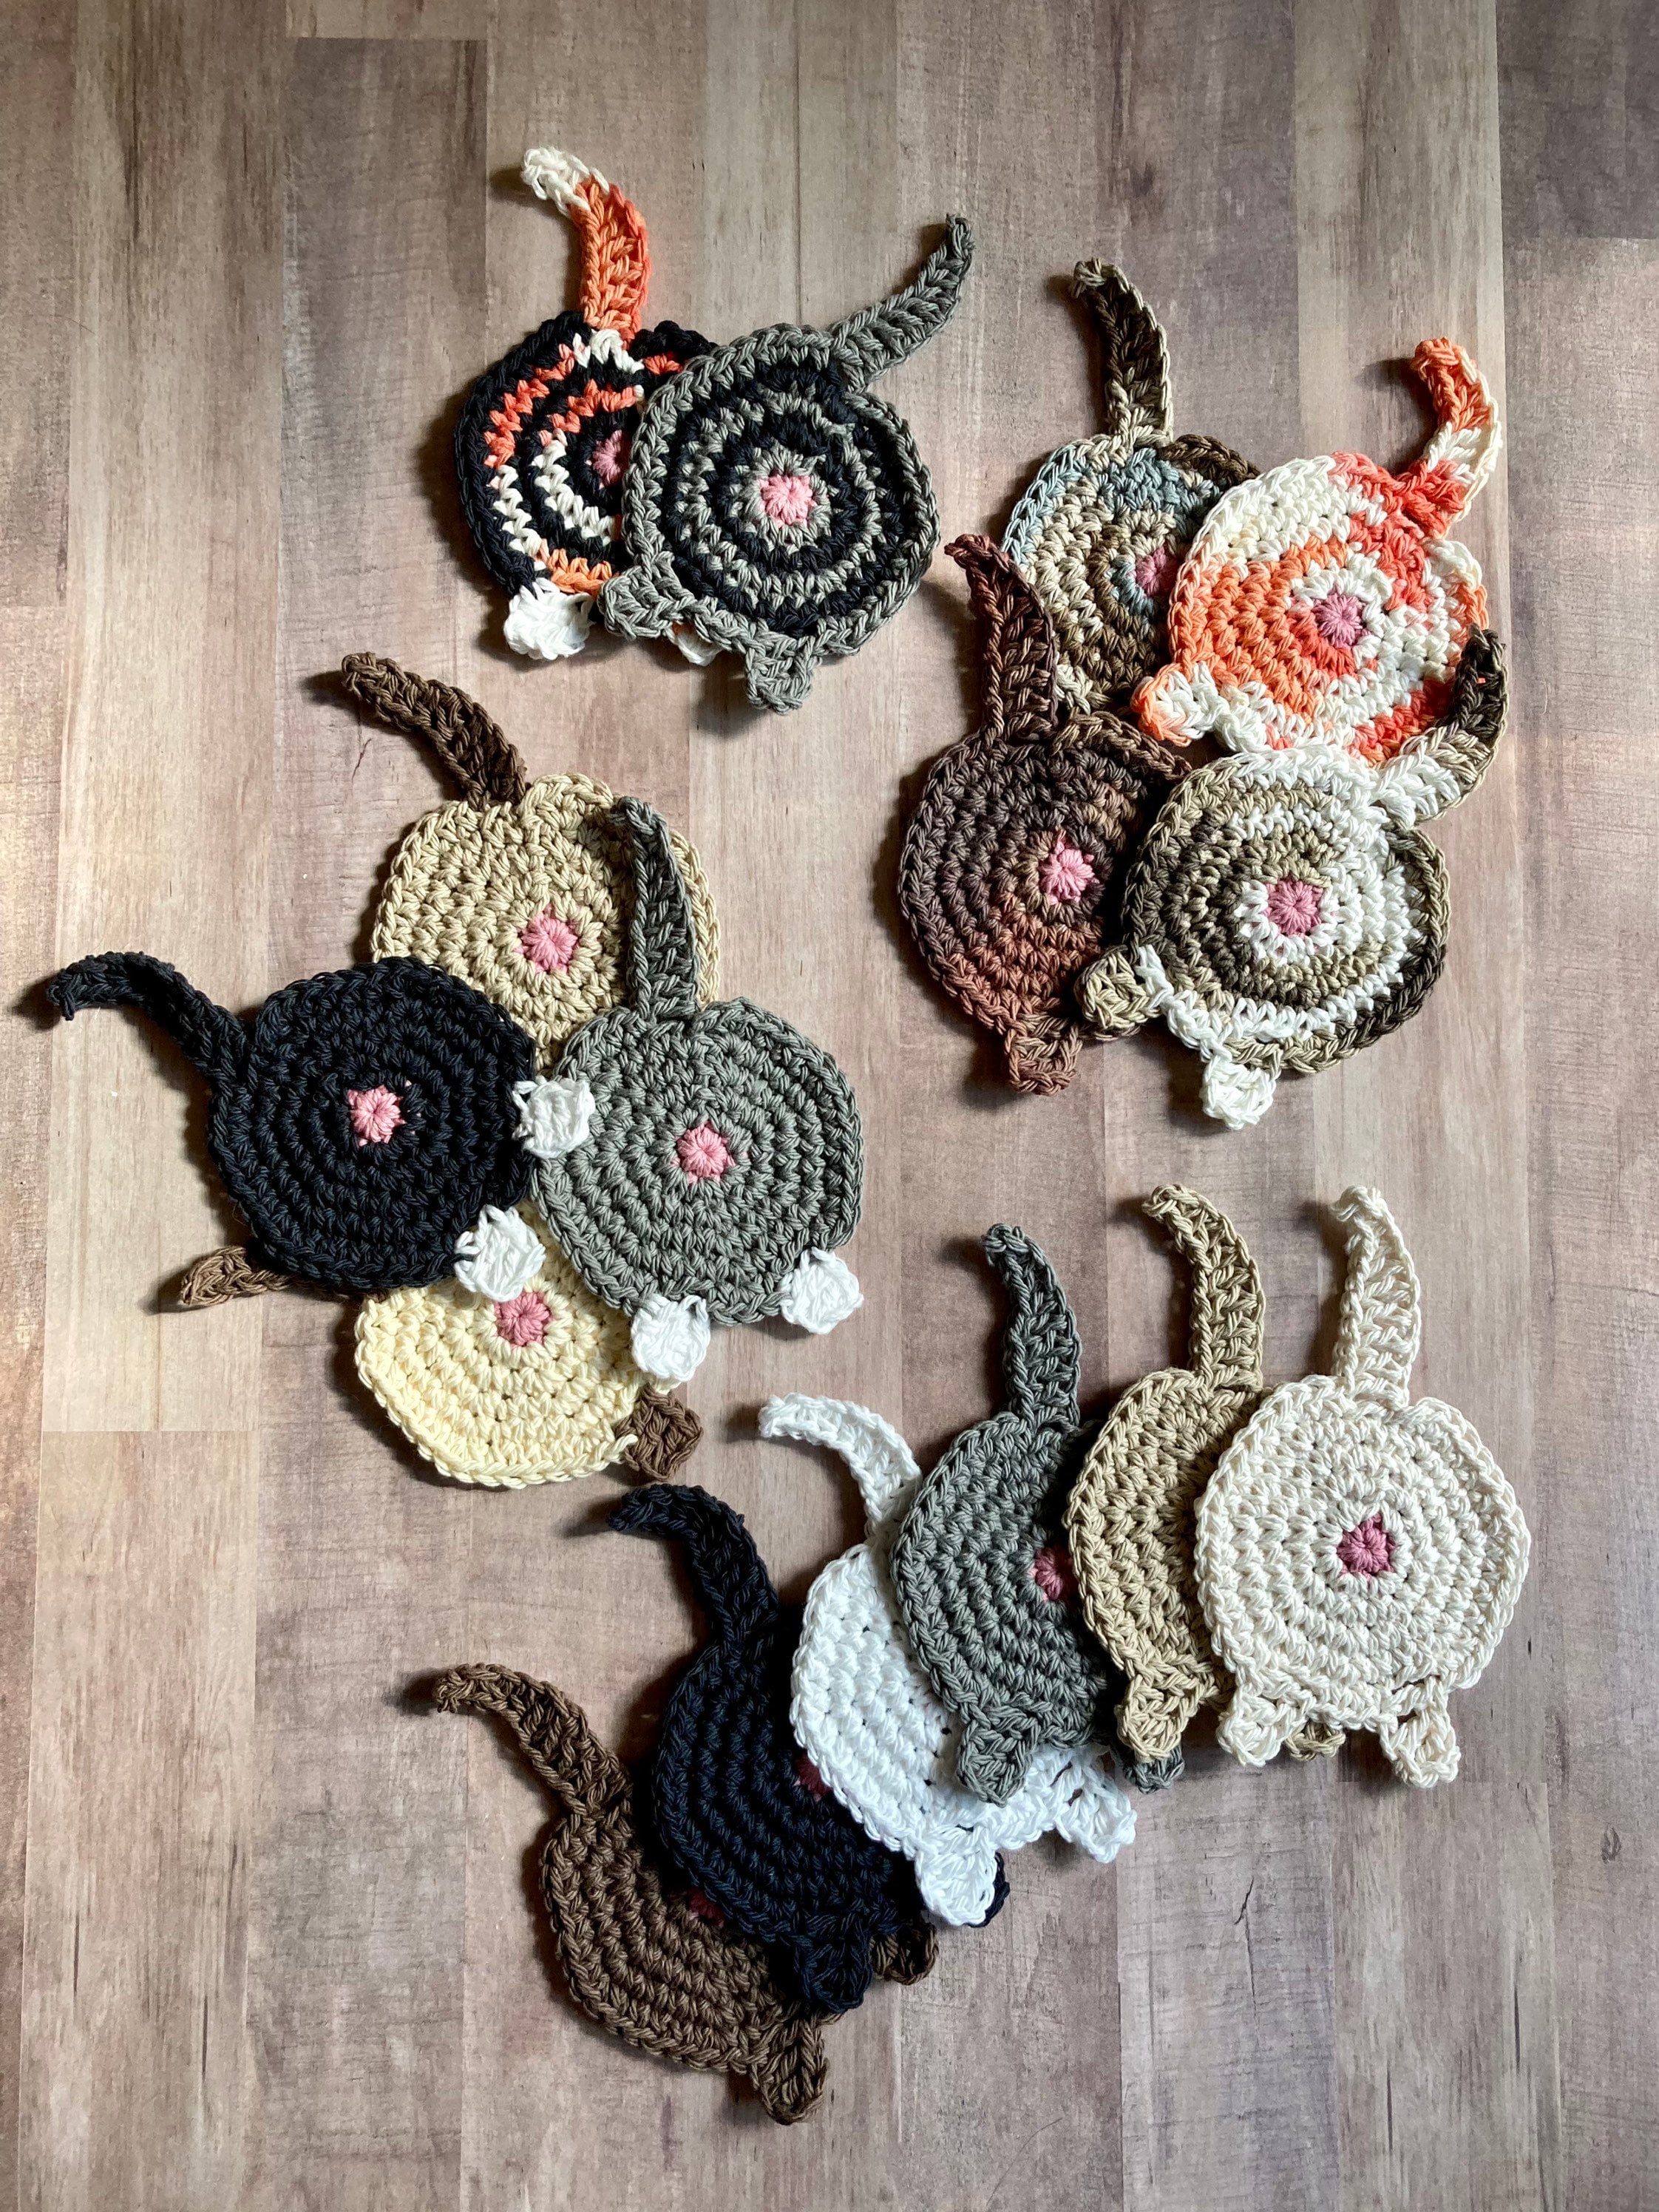 8 Pcs Cat Butt Coasters Cute Coasters for Drinks Crochet Cat Coasters  Absorbent Bar Coasters Funny Cat Gifts for Cat Lover, Home Office Table  Decor, 8